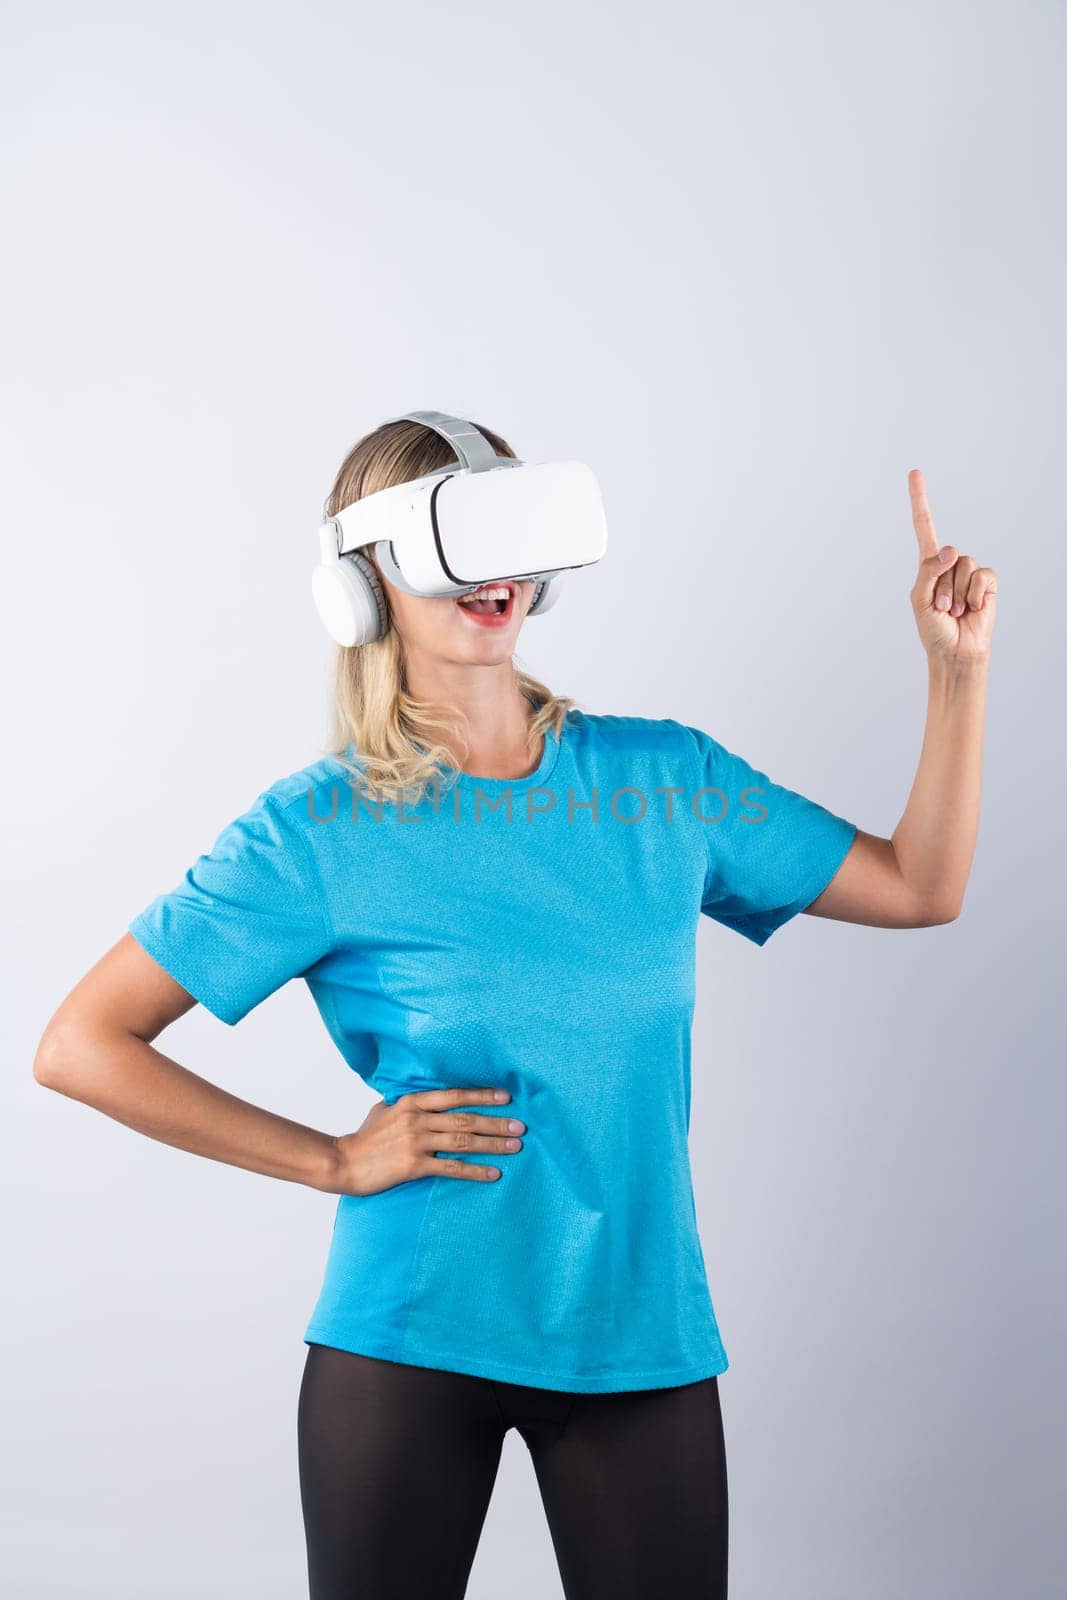 Girl pointing or spinning basketball while using VR glasses. Caucasian woman flexing while wearing casual shirt and visual reality goggles and standing at pink background. Innovation. Contraption.